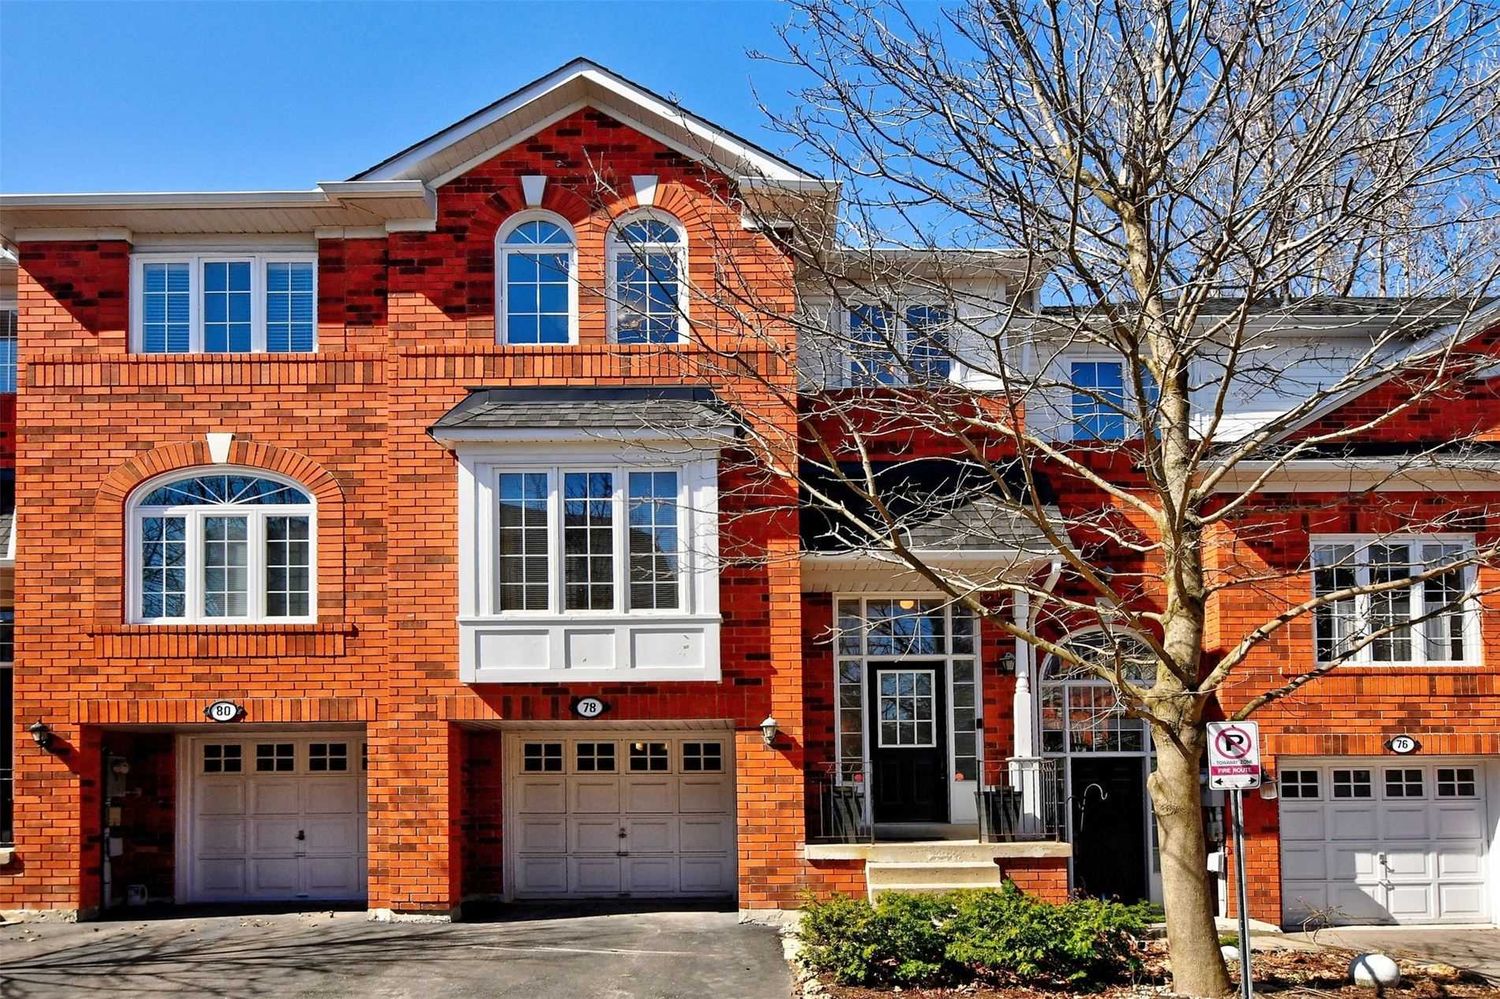 1-139 Mosaics Avenue. Mosaics Avenue Townhomes is located in  Aurora, Toronto - image #1 of 3